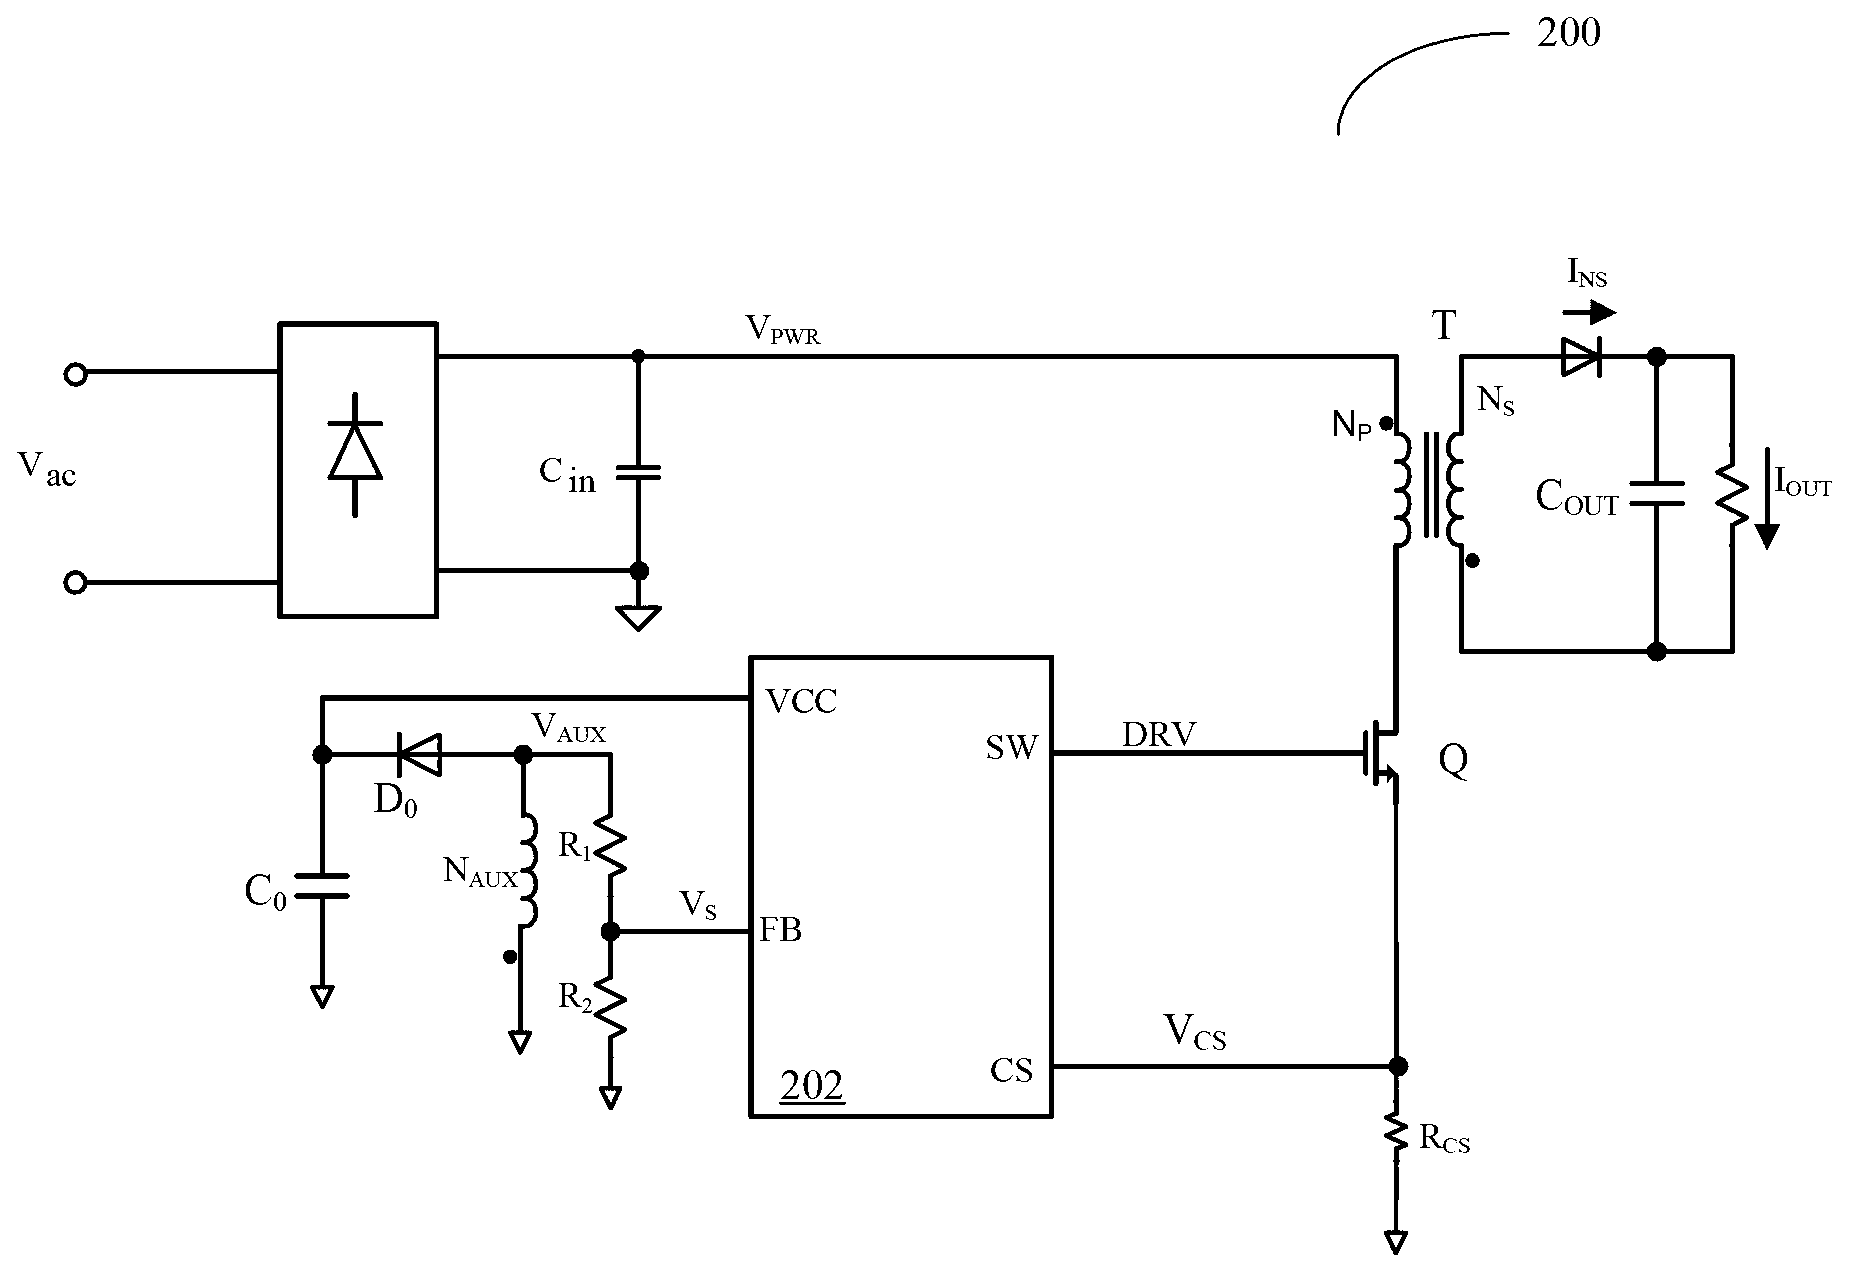 Integration switch power supply controller and switch power supply using the same